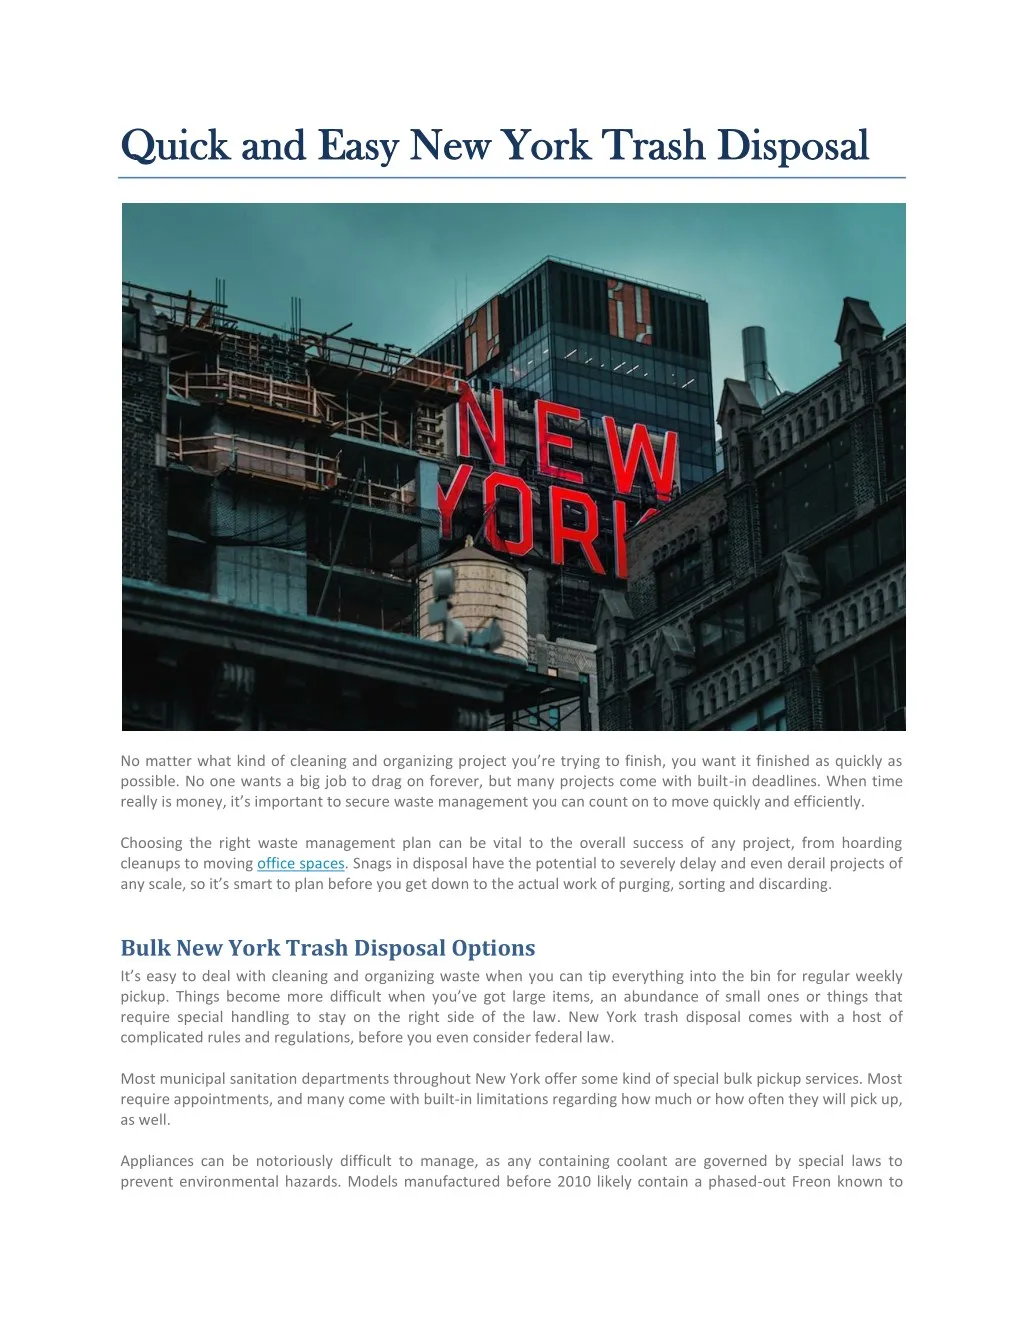 quick and easy new york trash disposal quick